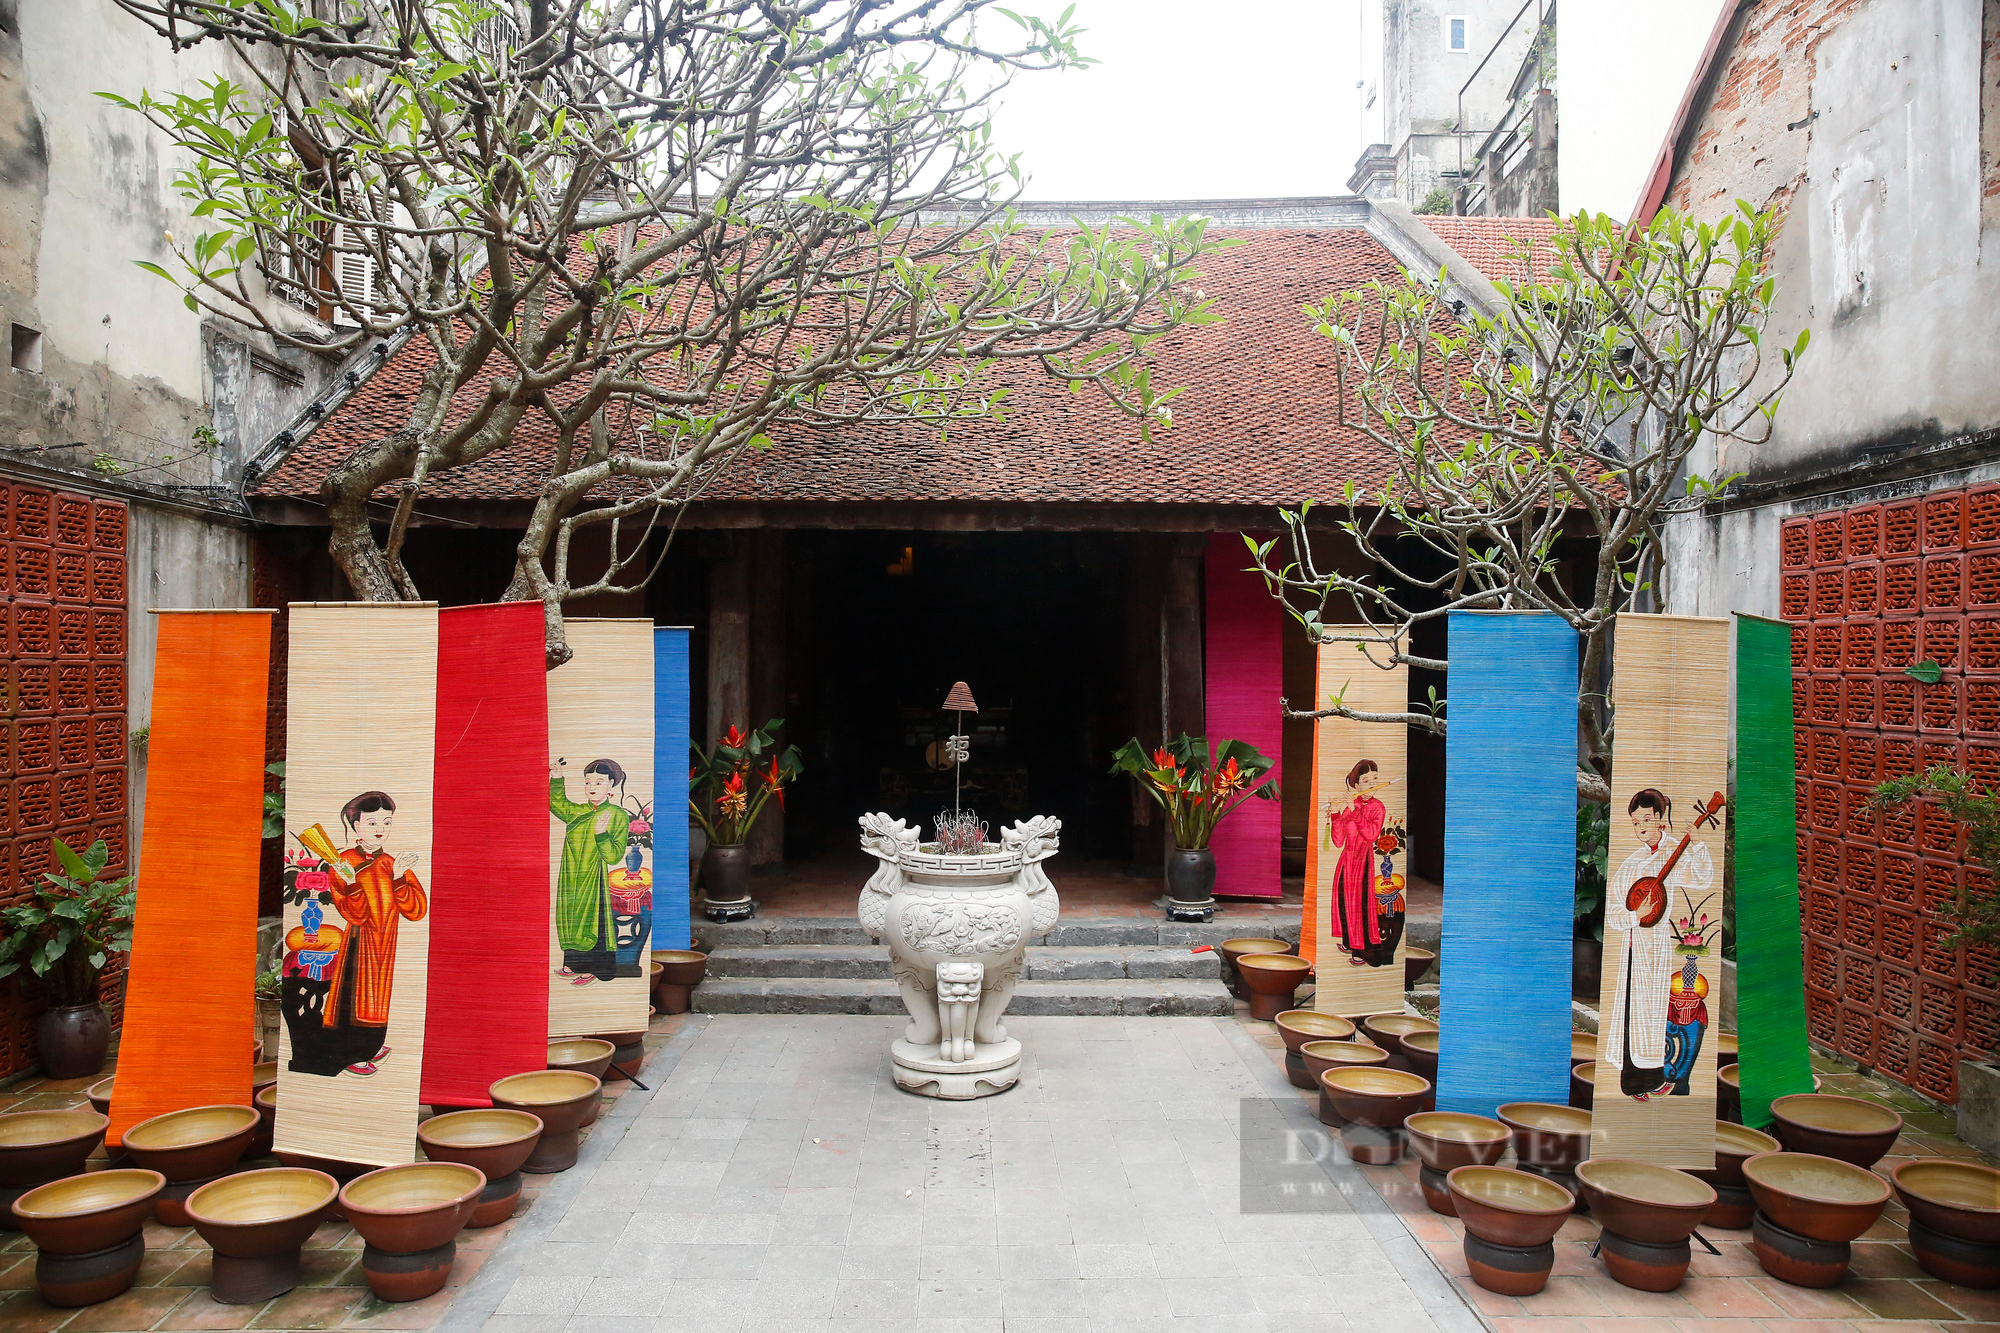 Visit Hanoi's Old Quarter to enjoy many unique cultural activities during the holiday season 30/4-1/5 - Photo 1.